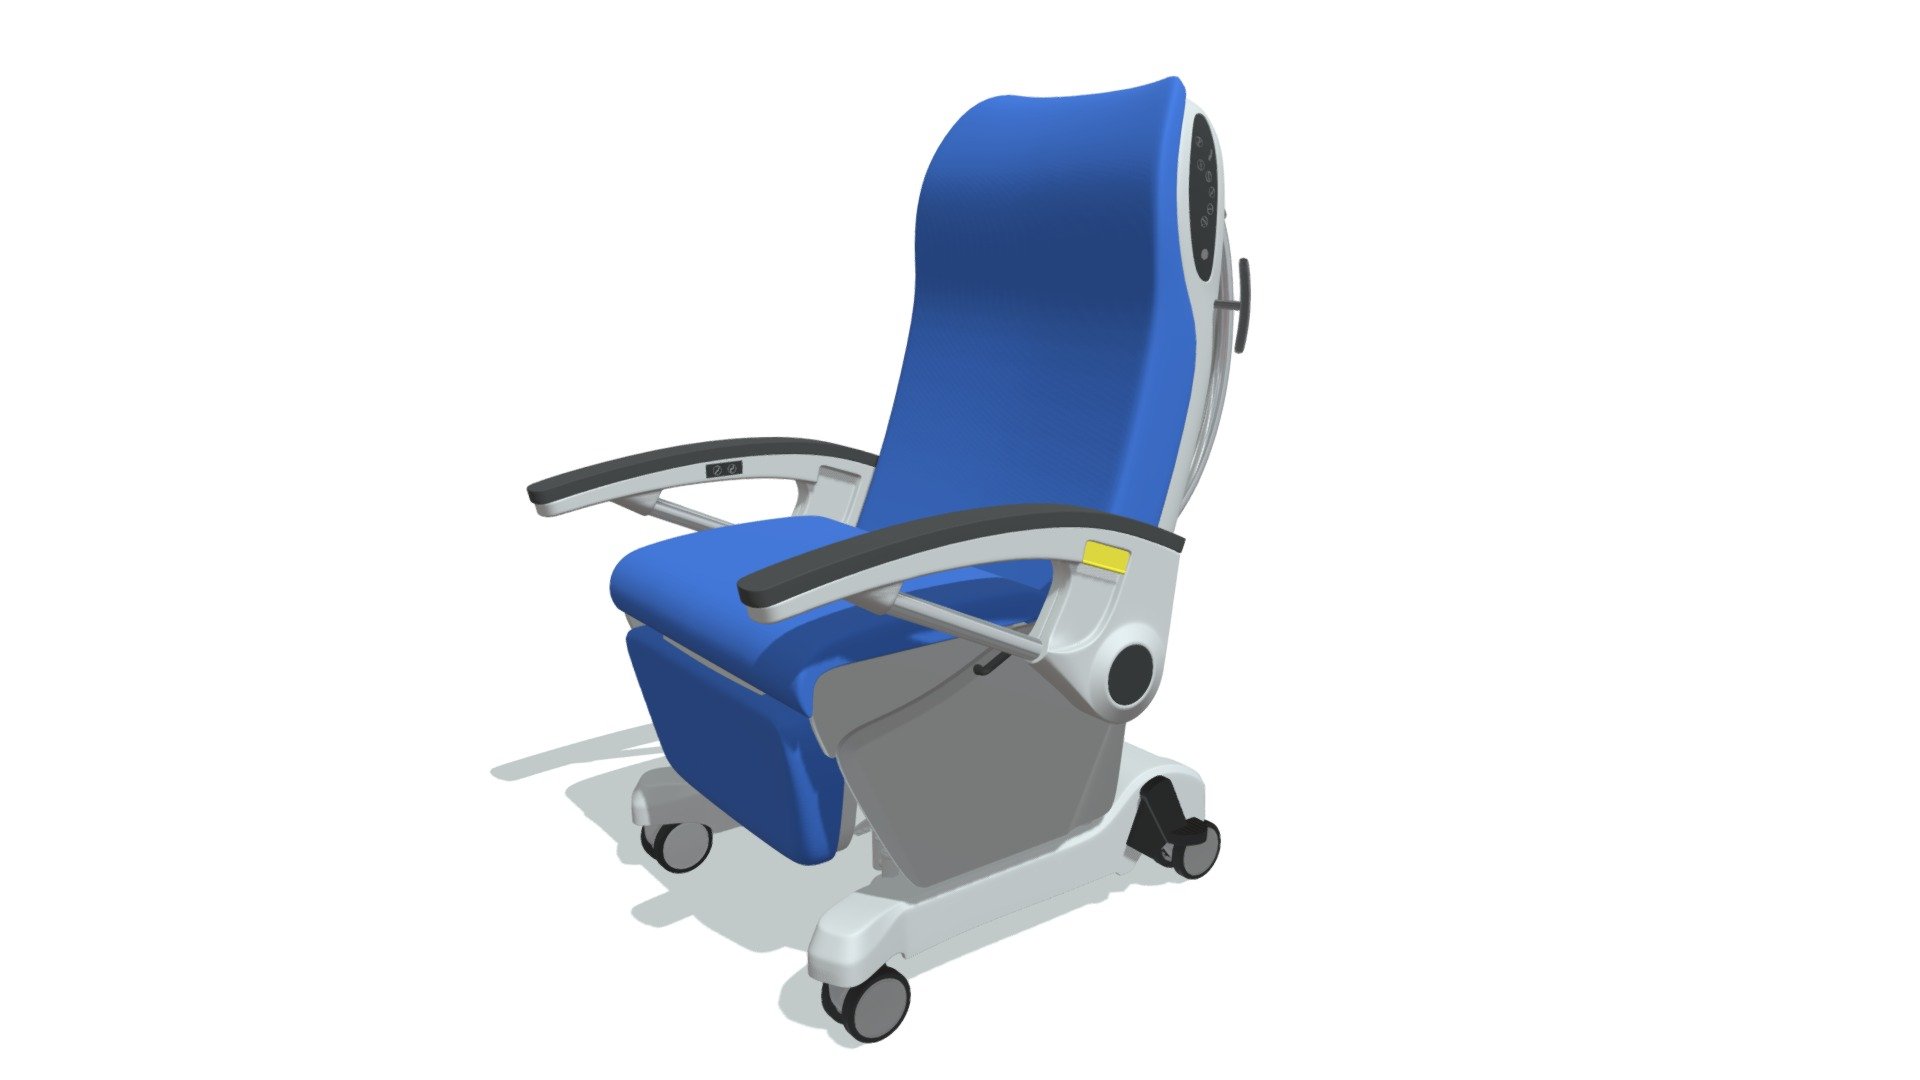 High quality 3d model of hospital patient wheel chair.
Colors can be easily modified 3d model